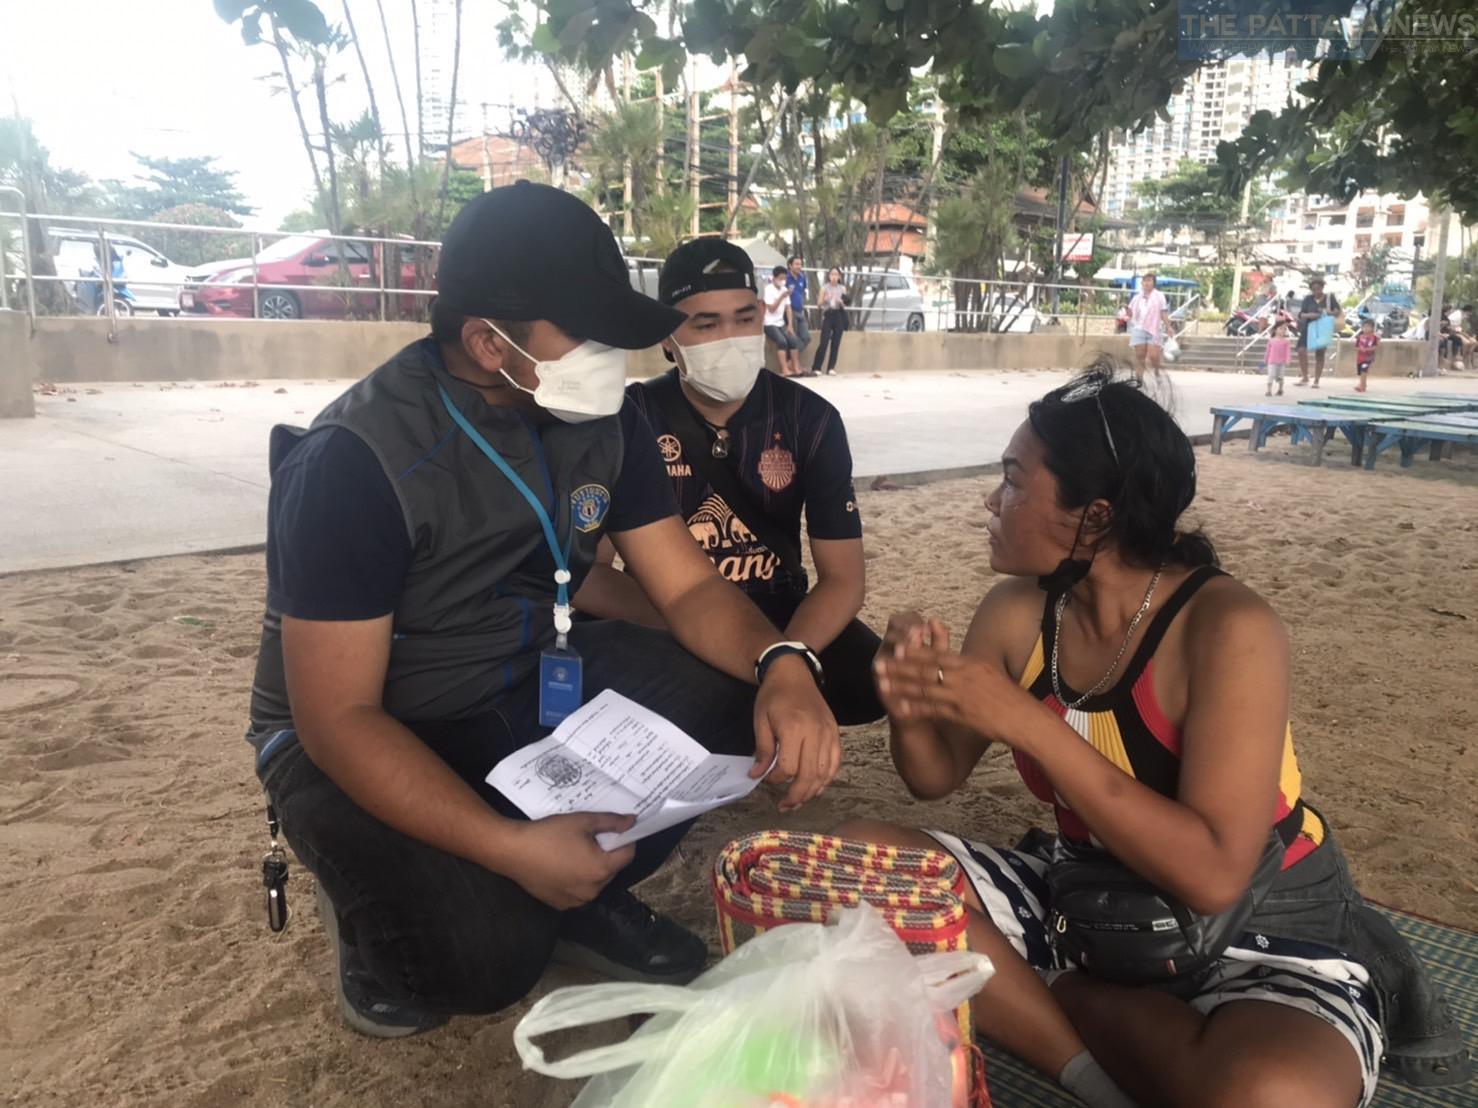 Woman arrested on a Pattaya area beach for allegedly opening fraudulent bank account involved in Chinese gambling website